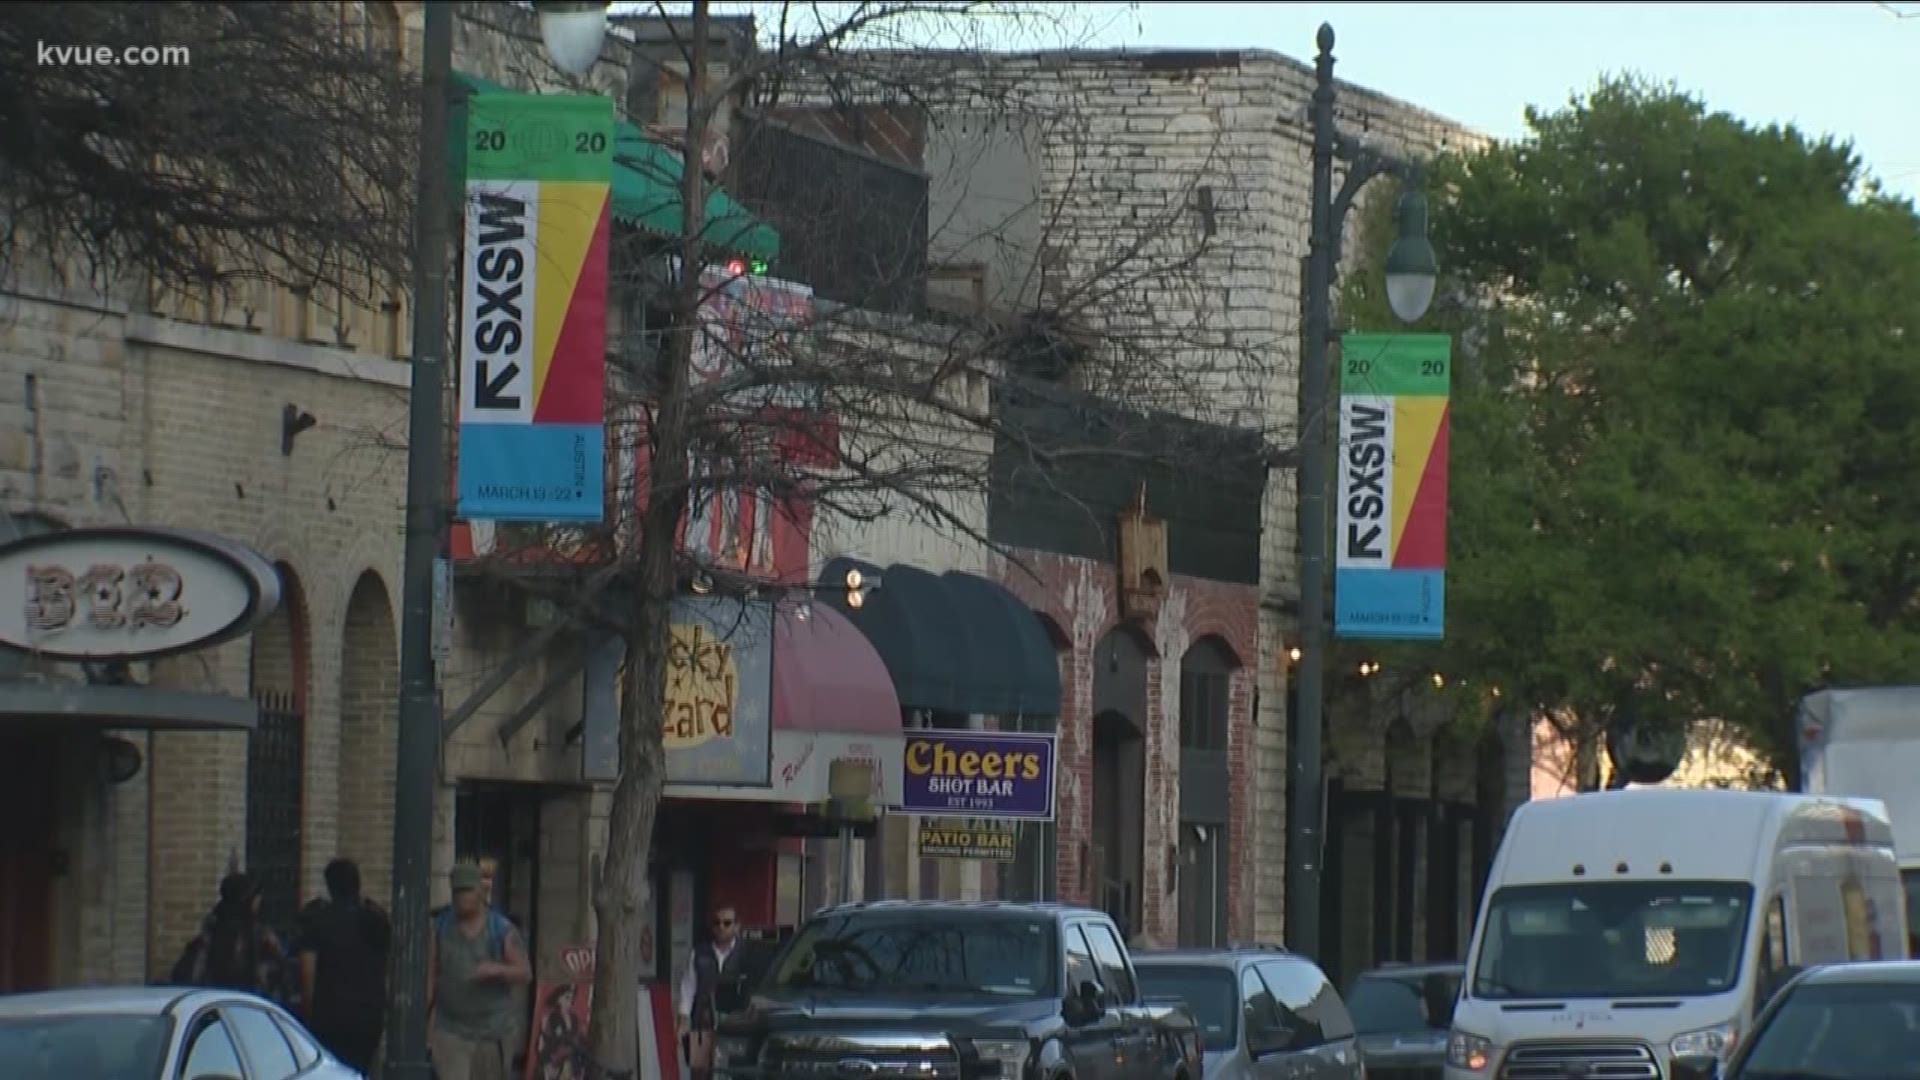 Bar owners on Sixth Street still believe there will be a large amount of people coming to Austin, despite the cancellation.